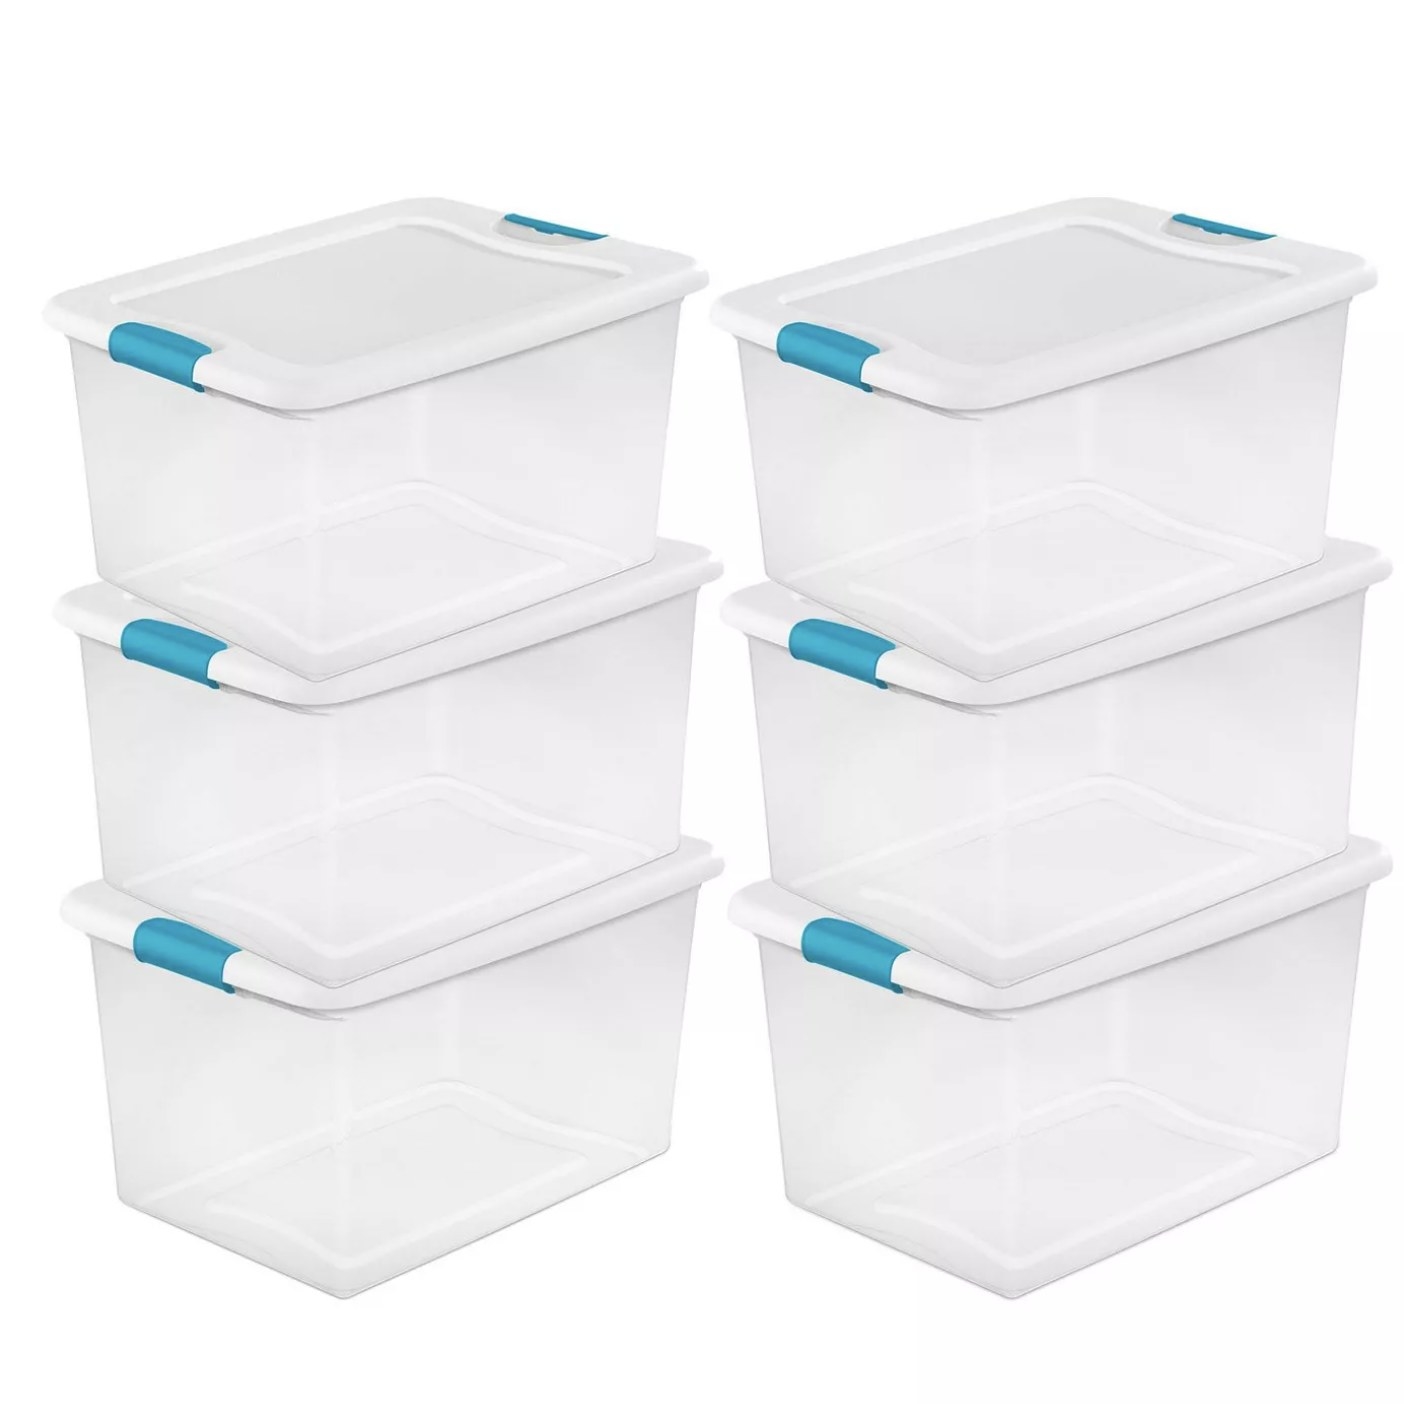 Six clear plastic containers with lids